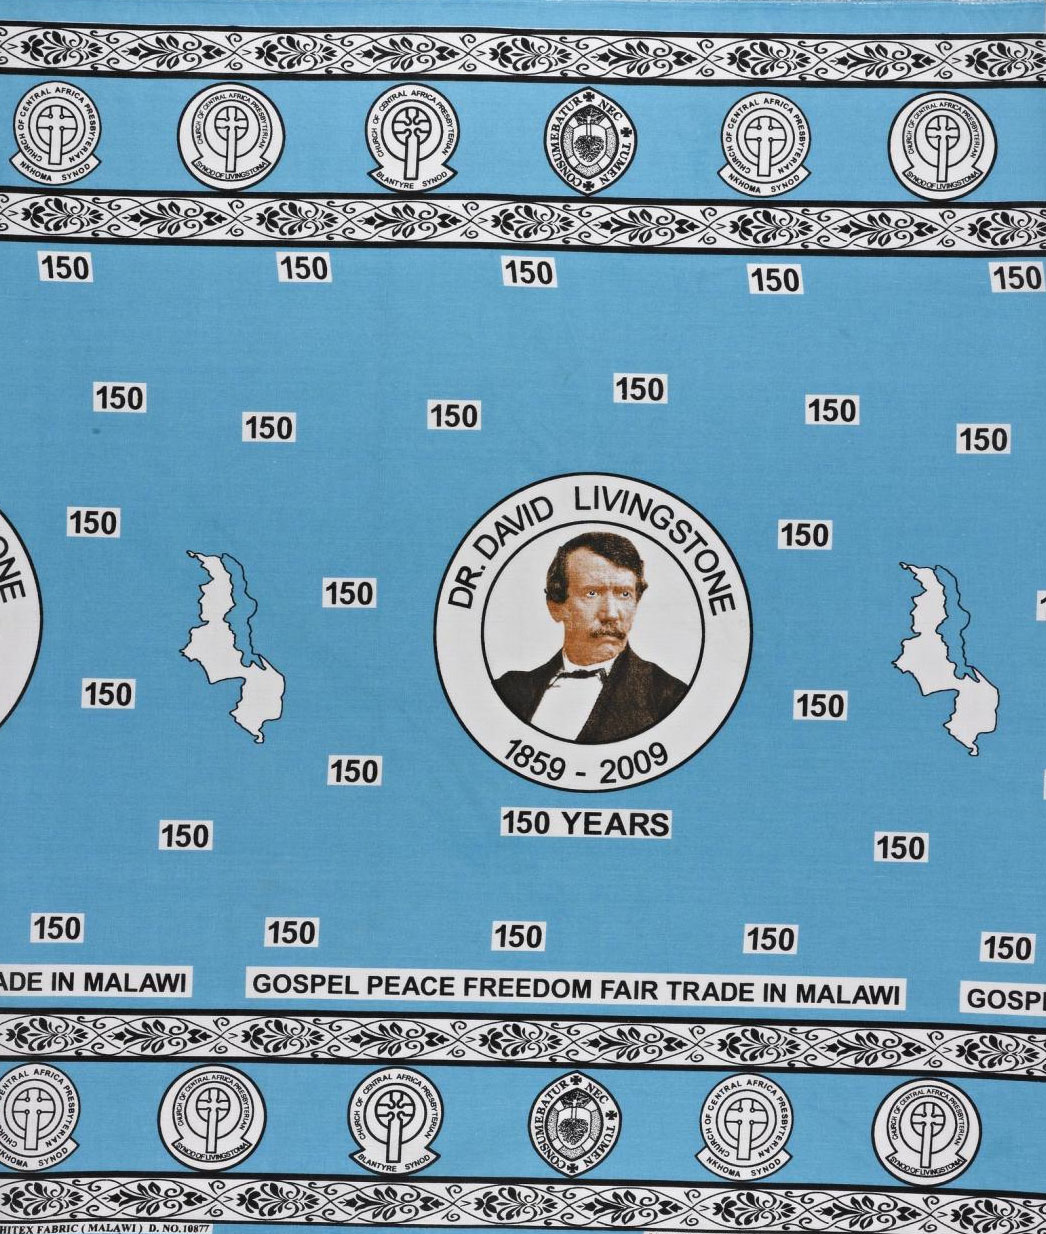 Cotton cloth commissioned by the Church of Central Africa Presbyterian to commemorate 150 years since the arrival of Scottish missionary David Livingstone in Malawi: Africa, Southern Africa, Malawi, 2009.